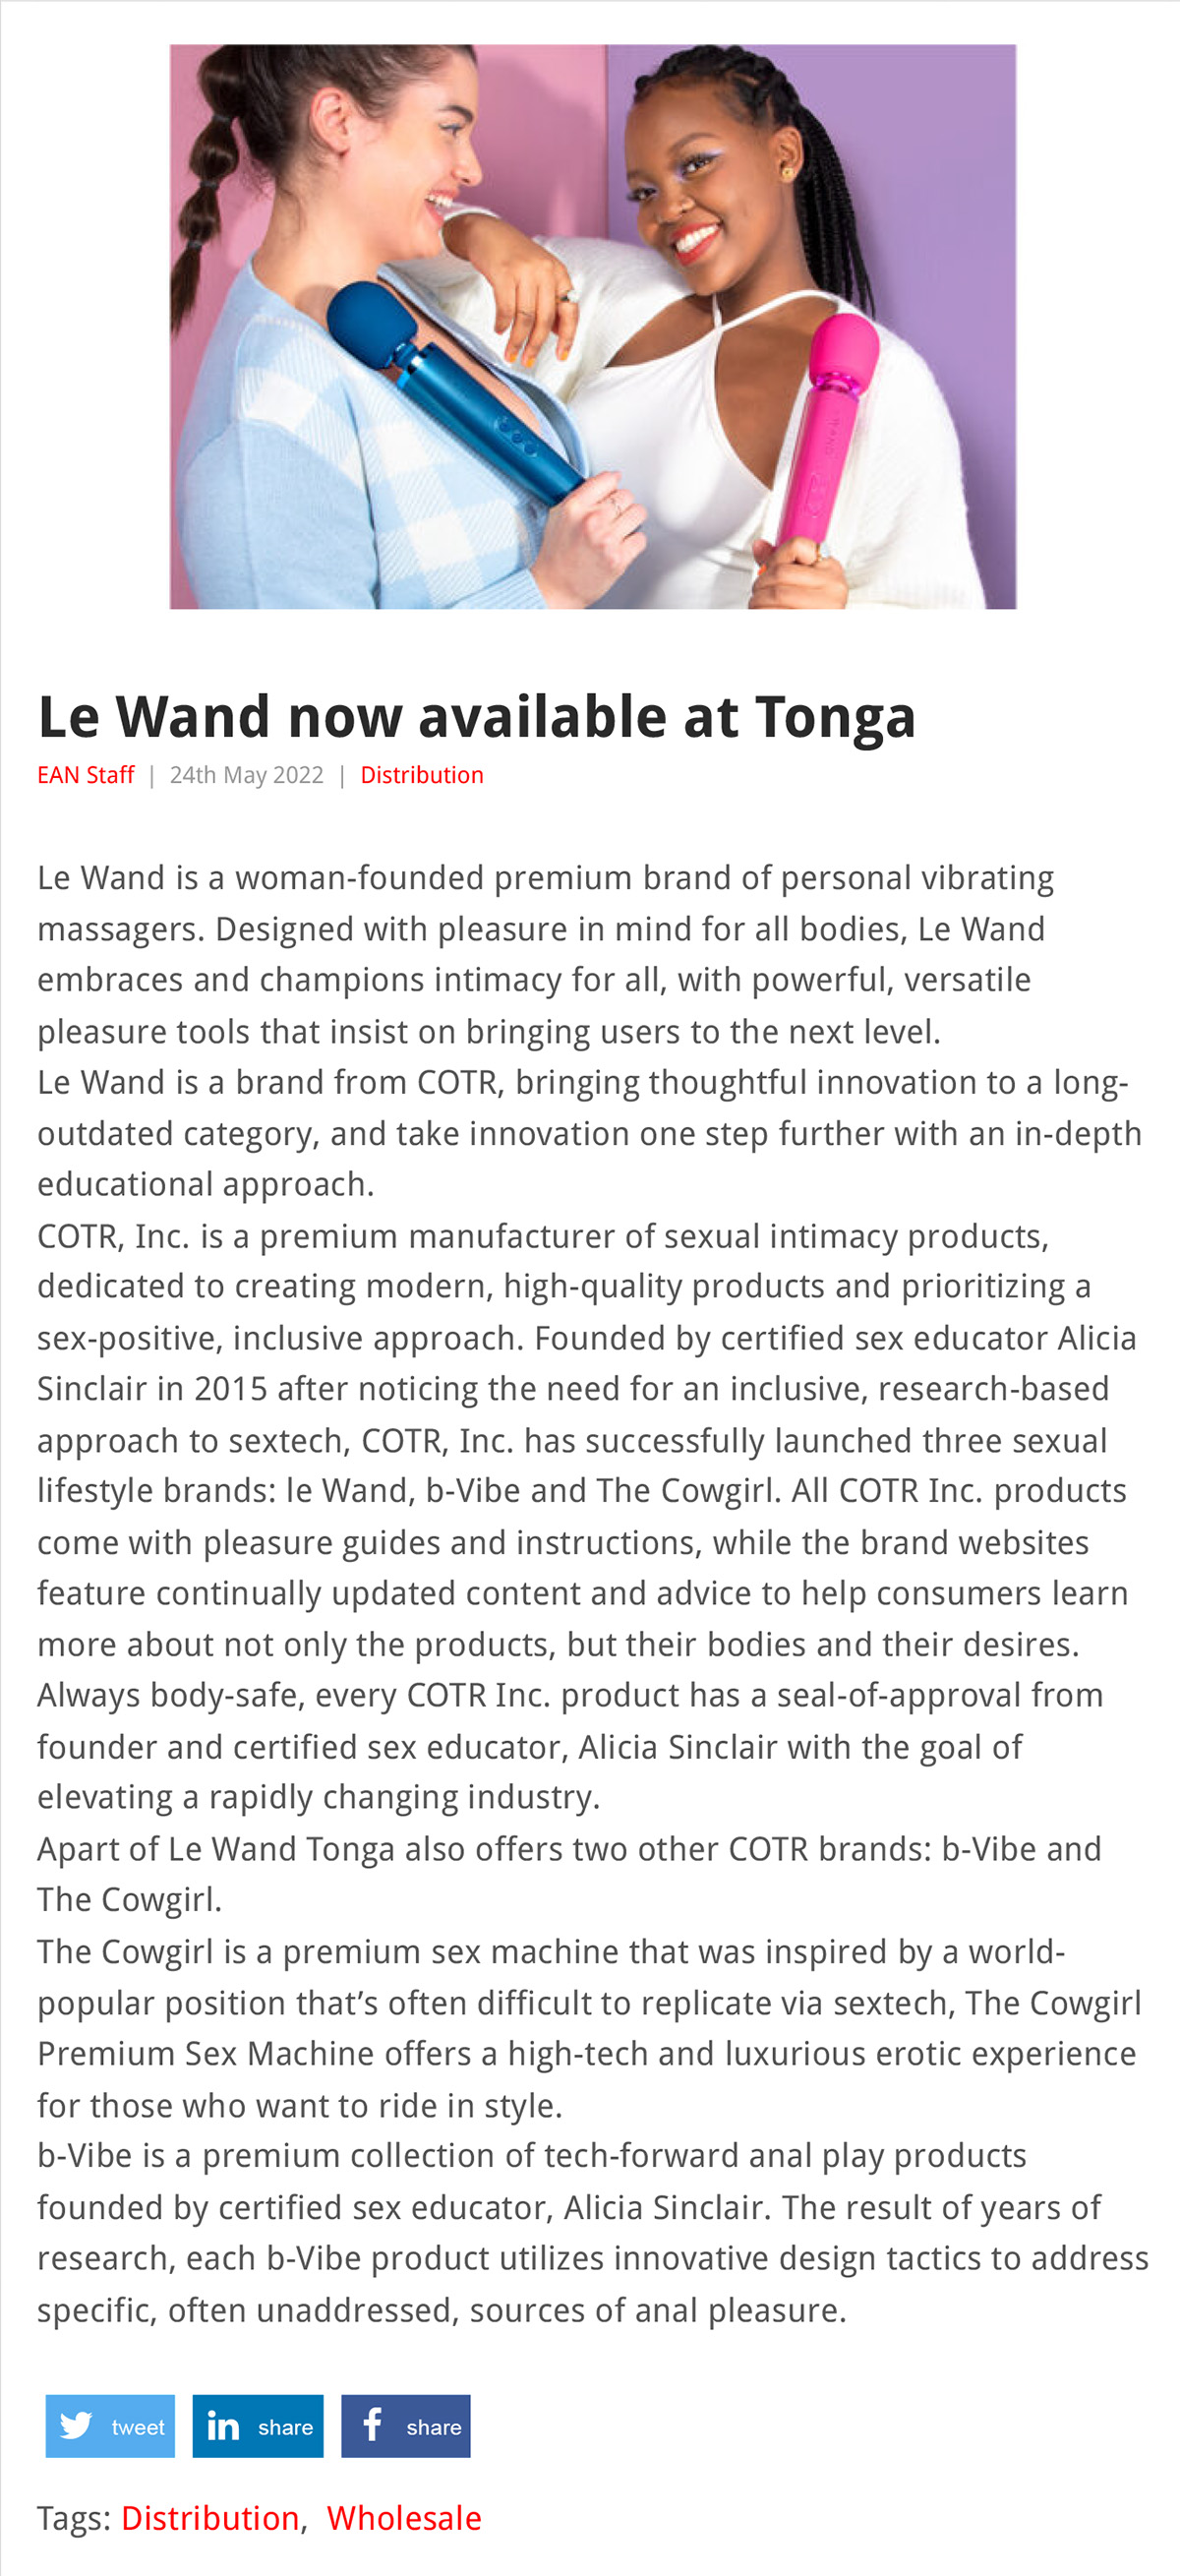 2022-05 EAN-Online - Le Wand at Tonga